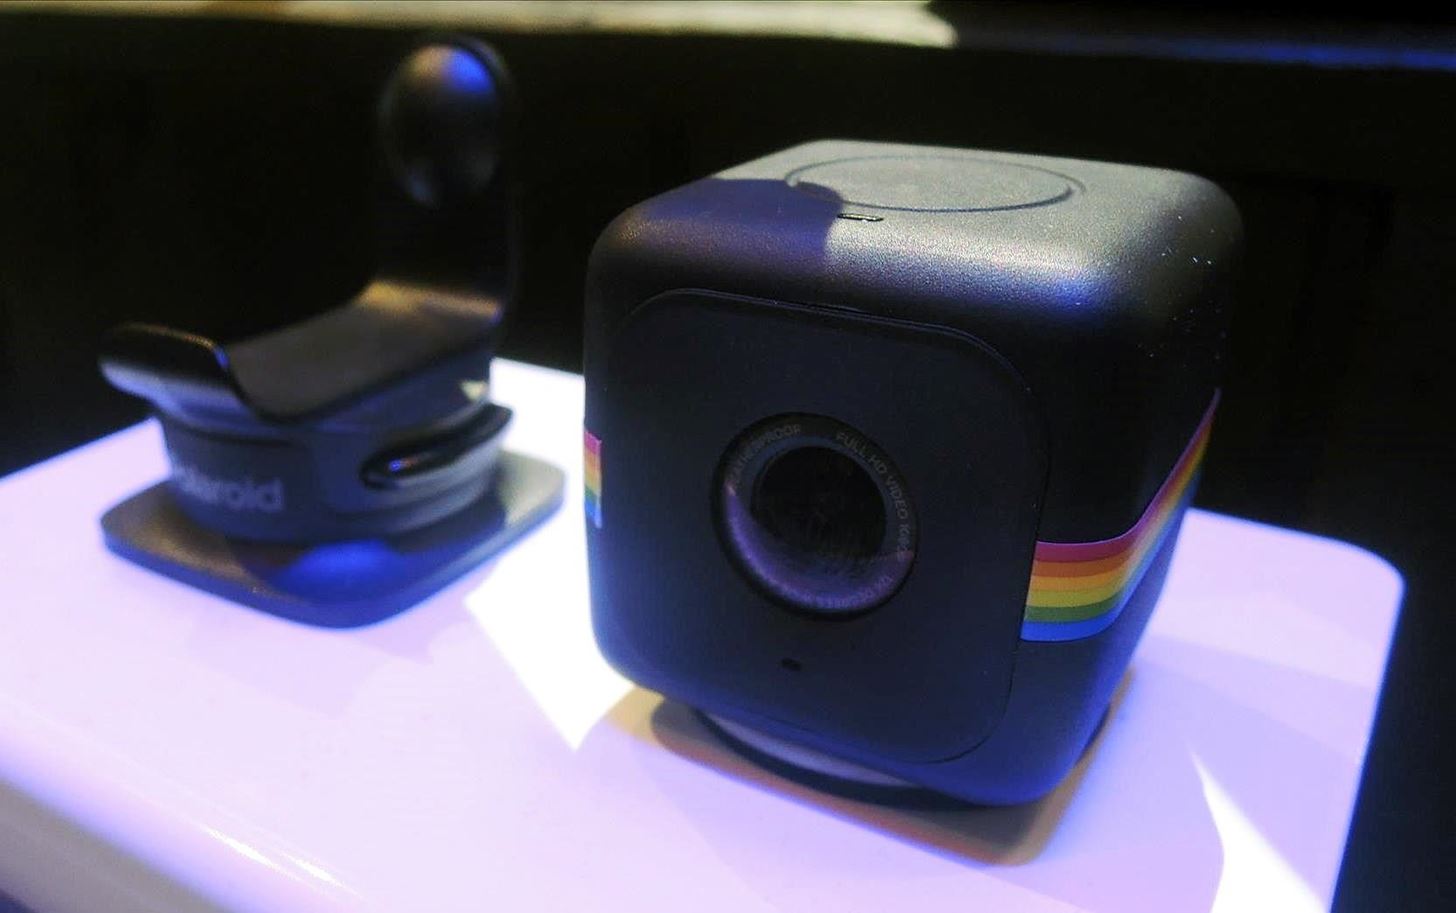 CES 2015: The CUBE Action Camera, Polaroid's Answer to the GoPro